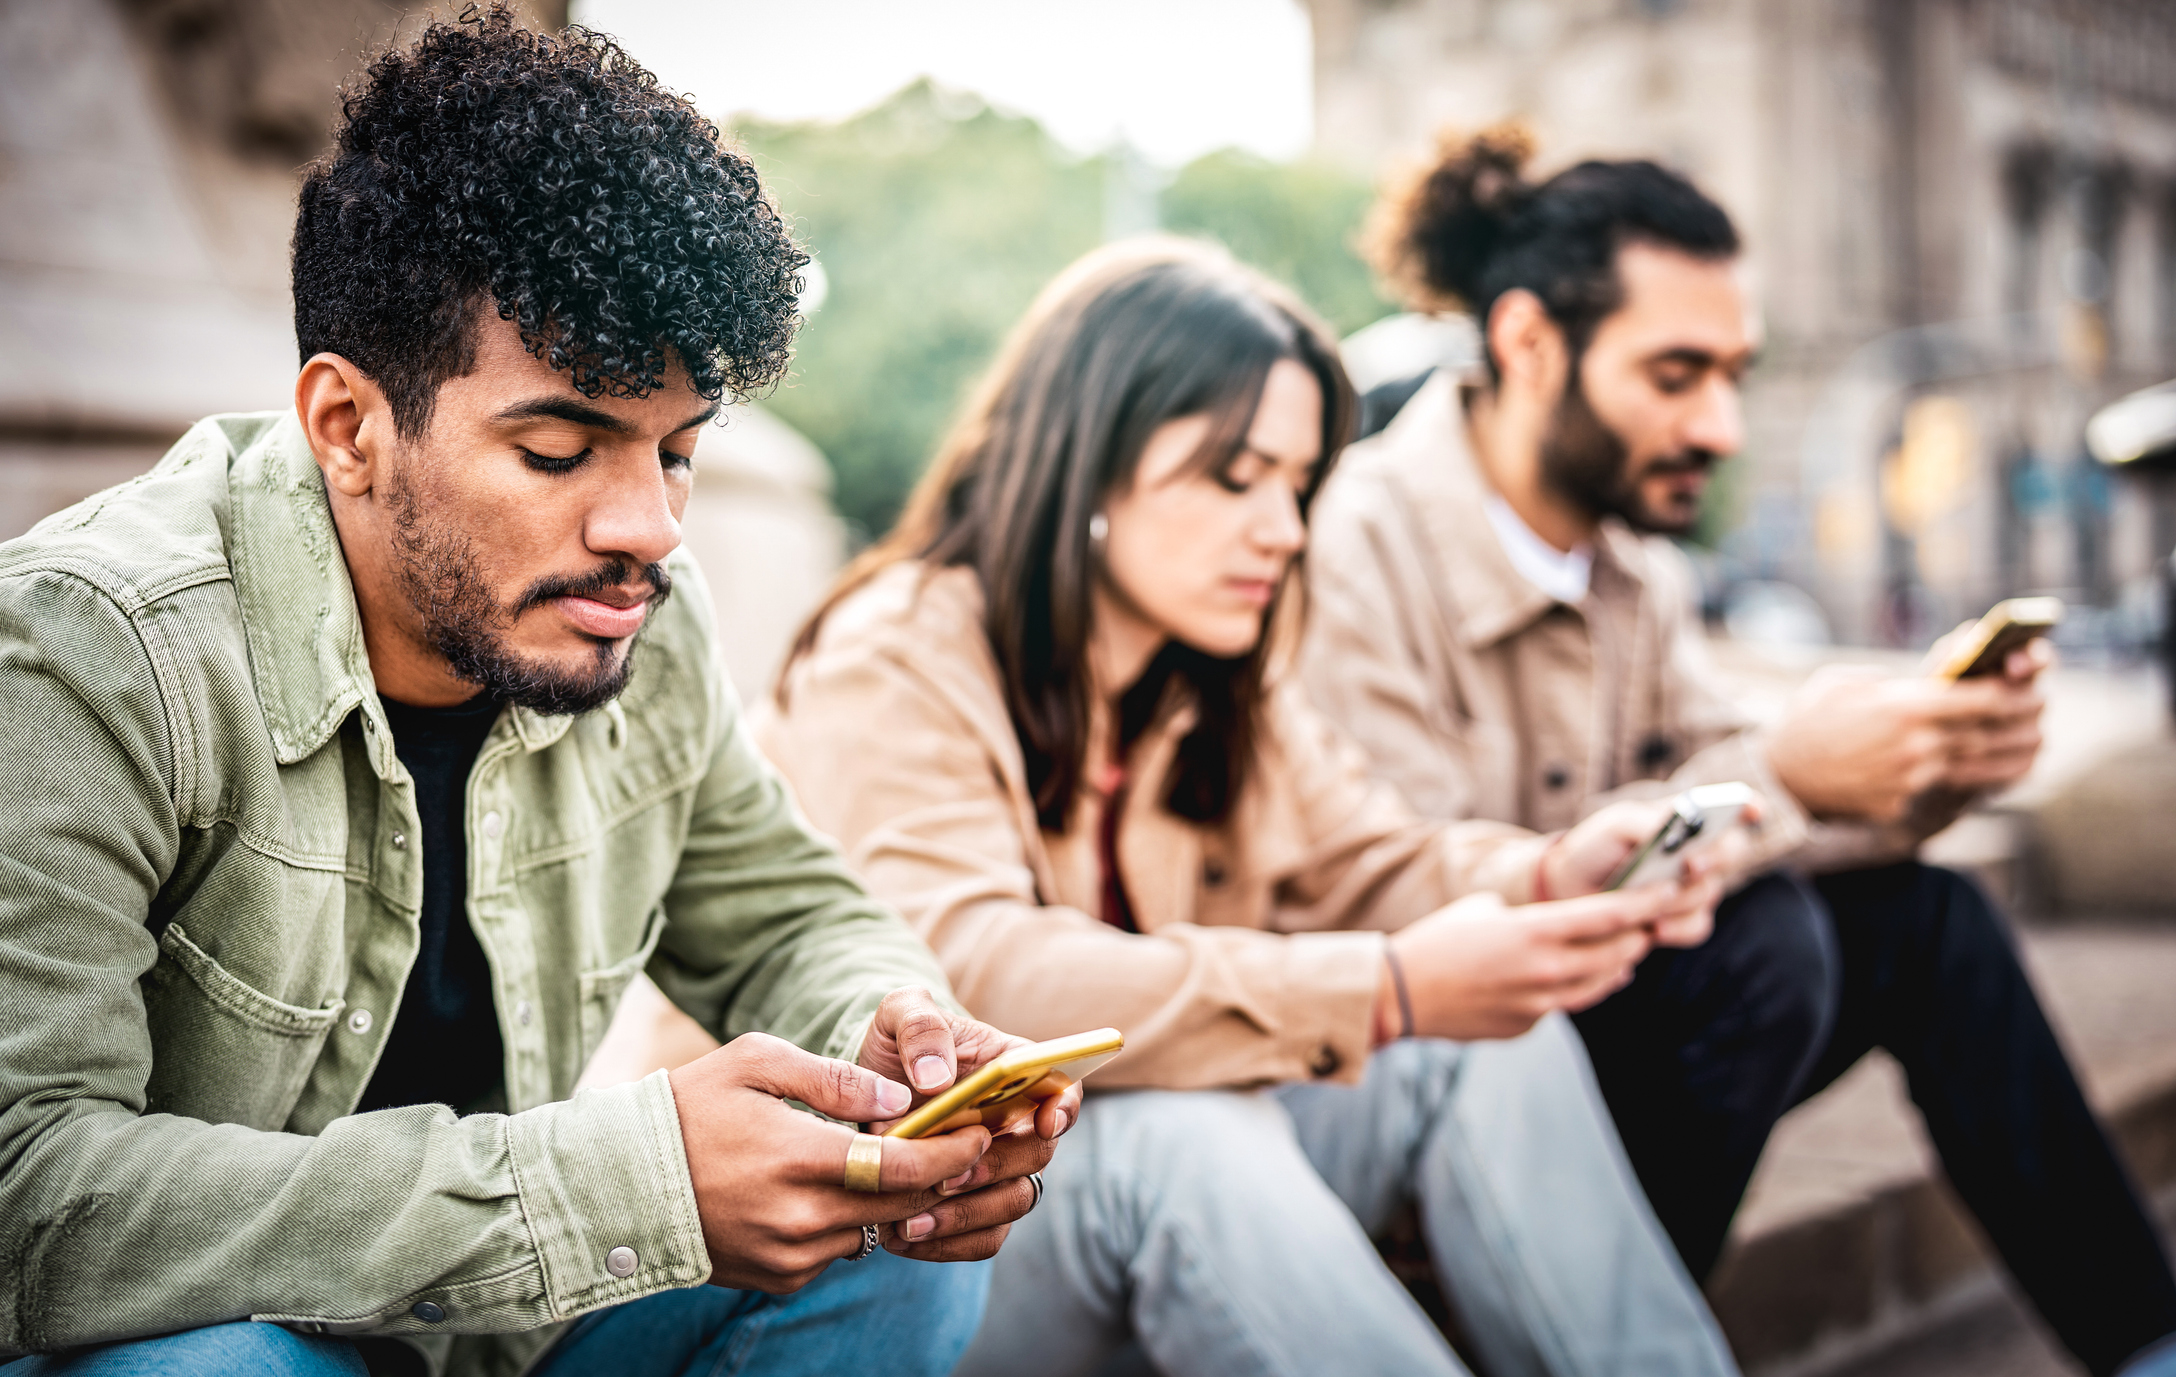 Stock image of three people, man, woman, man, sitting next to one another and all looking at their phones.